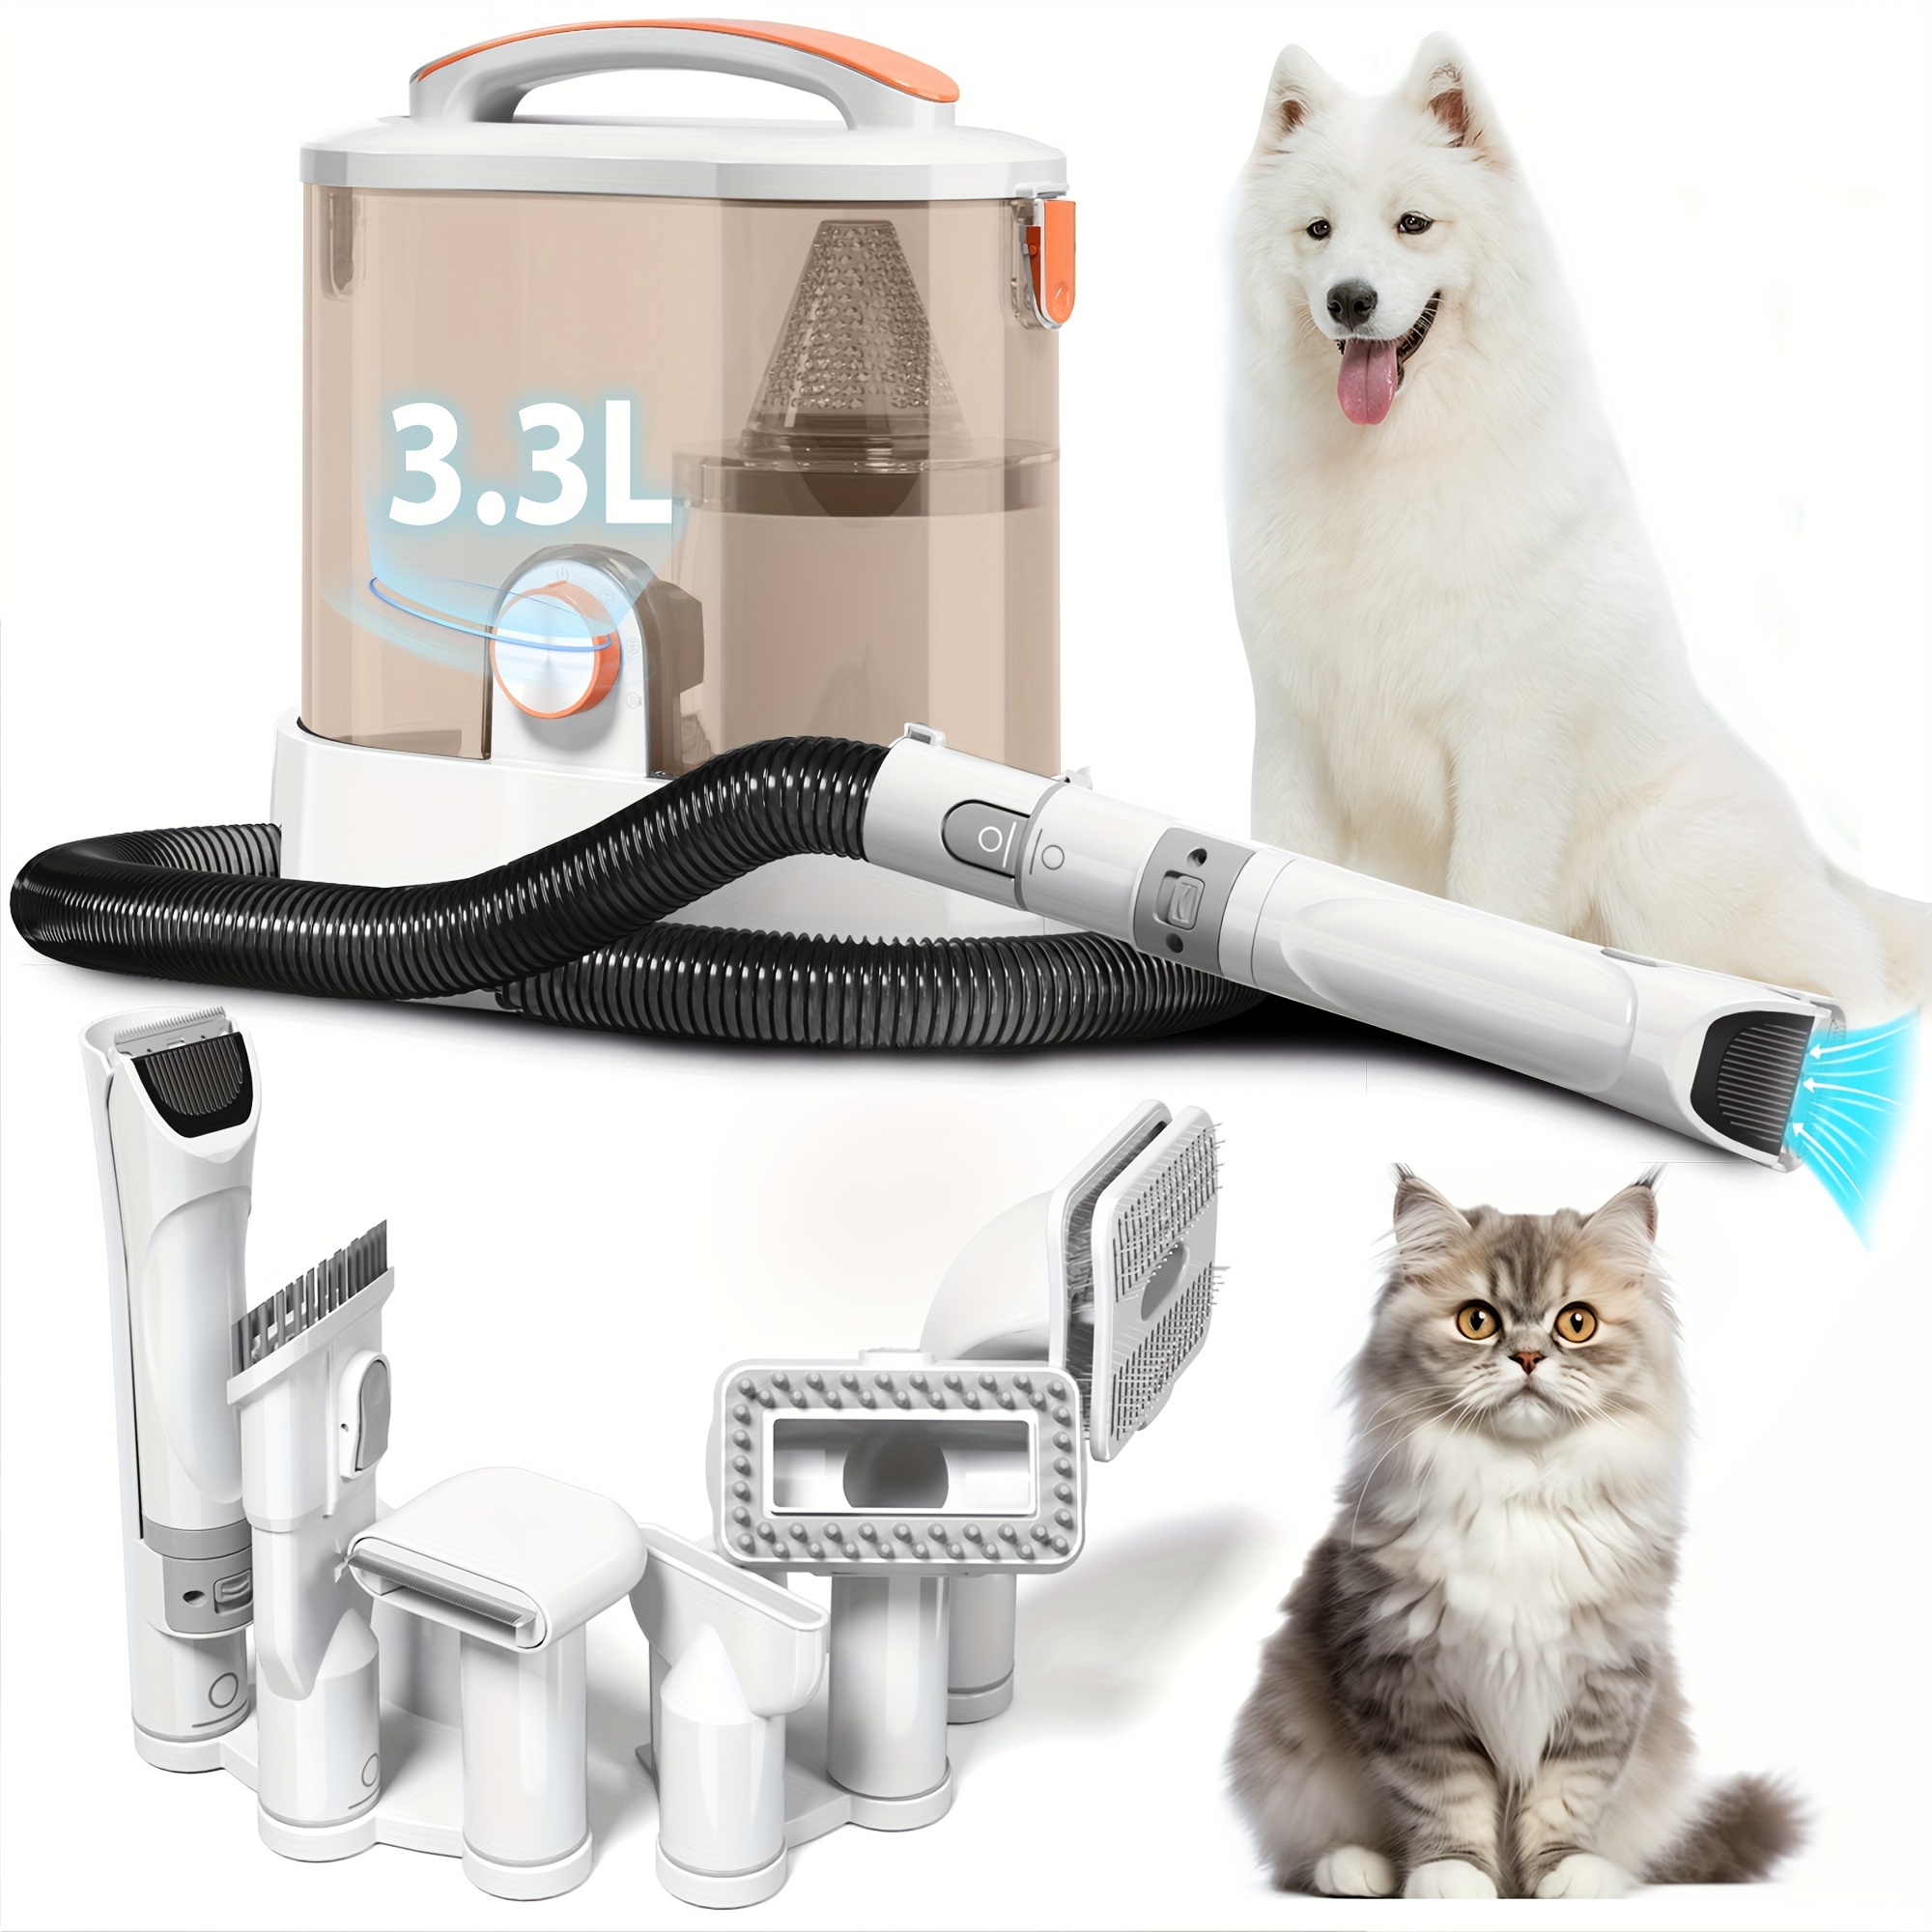 

Pet Hair Vacuum With Dog Clippers - Multi-purpose Pet Grooming Kit With 3.3l Large Capacity Dust Bin And Hair Dryer, 6 Grooming Tools For Dogs And Cats (orange And 6-in-1)